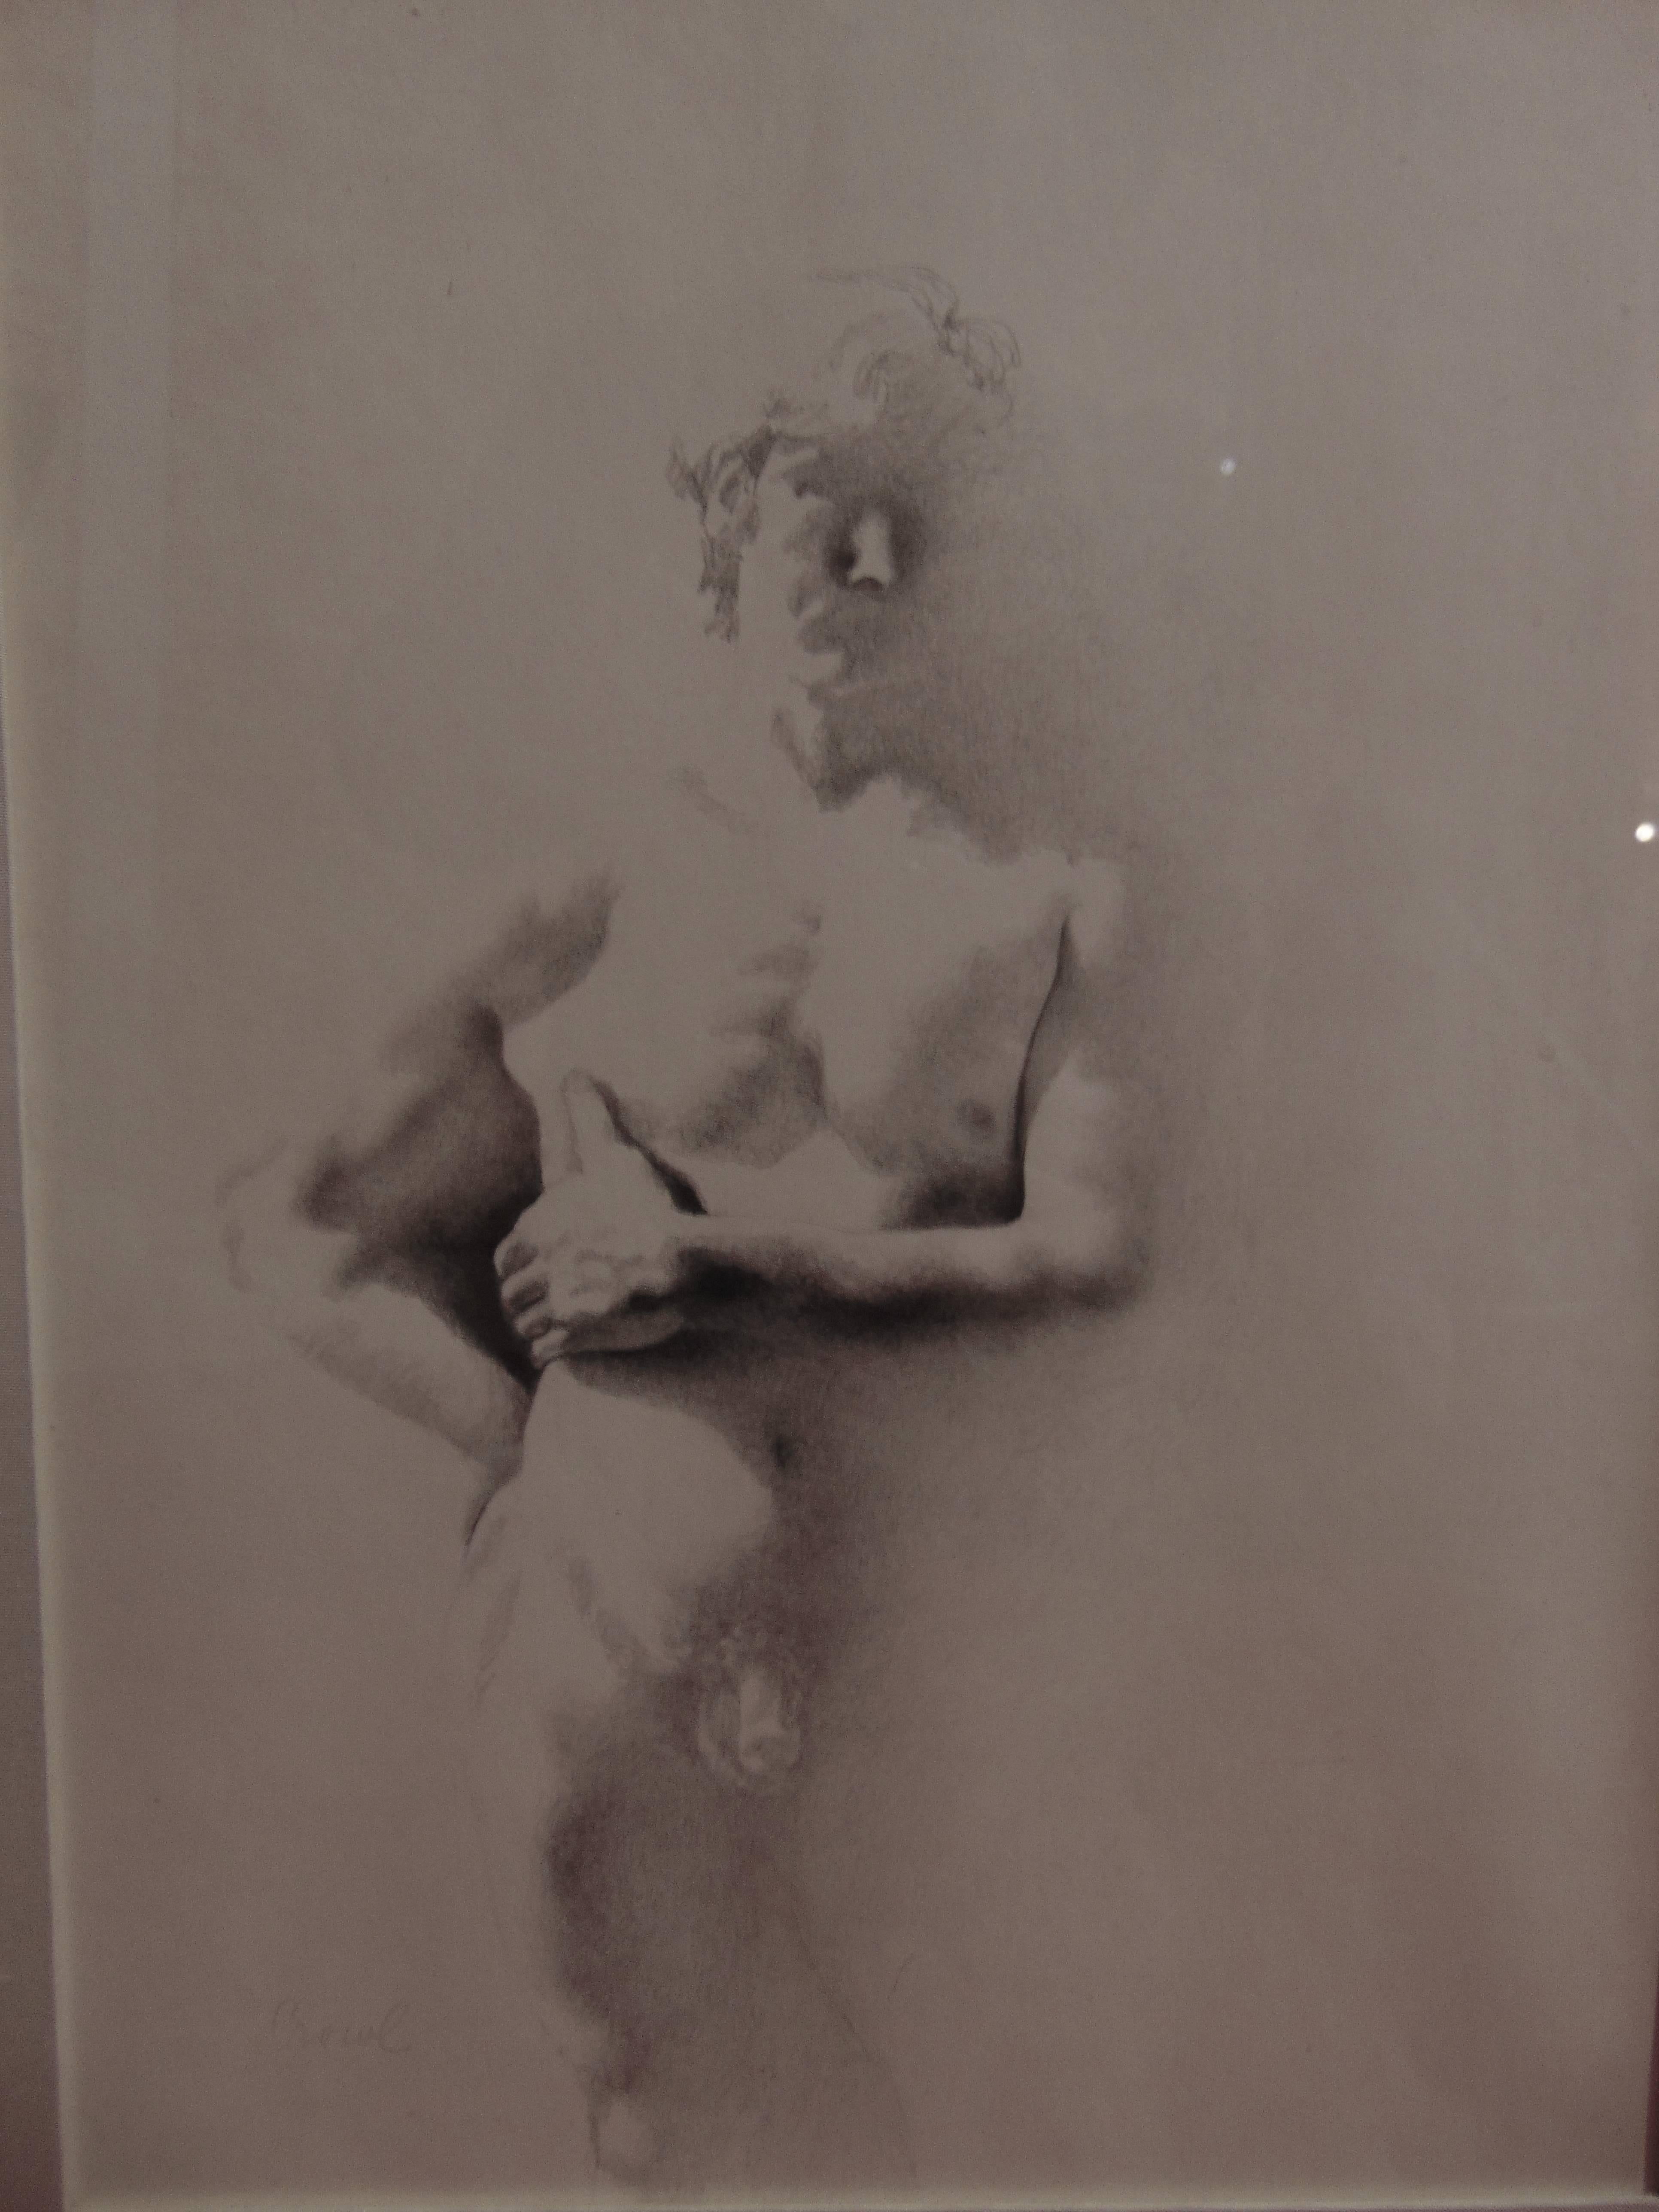 A male nude drawing, pencil on paper by Robert Crowl (1921) Crowl is known for his youthful nudes in a domestic situation. This drawing dates from Crowl's exhibition at the Graham Gallery in New York City in 1971. In original frame, The drawing size